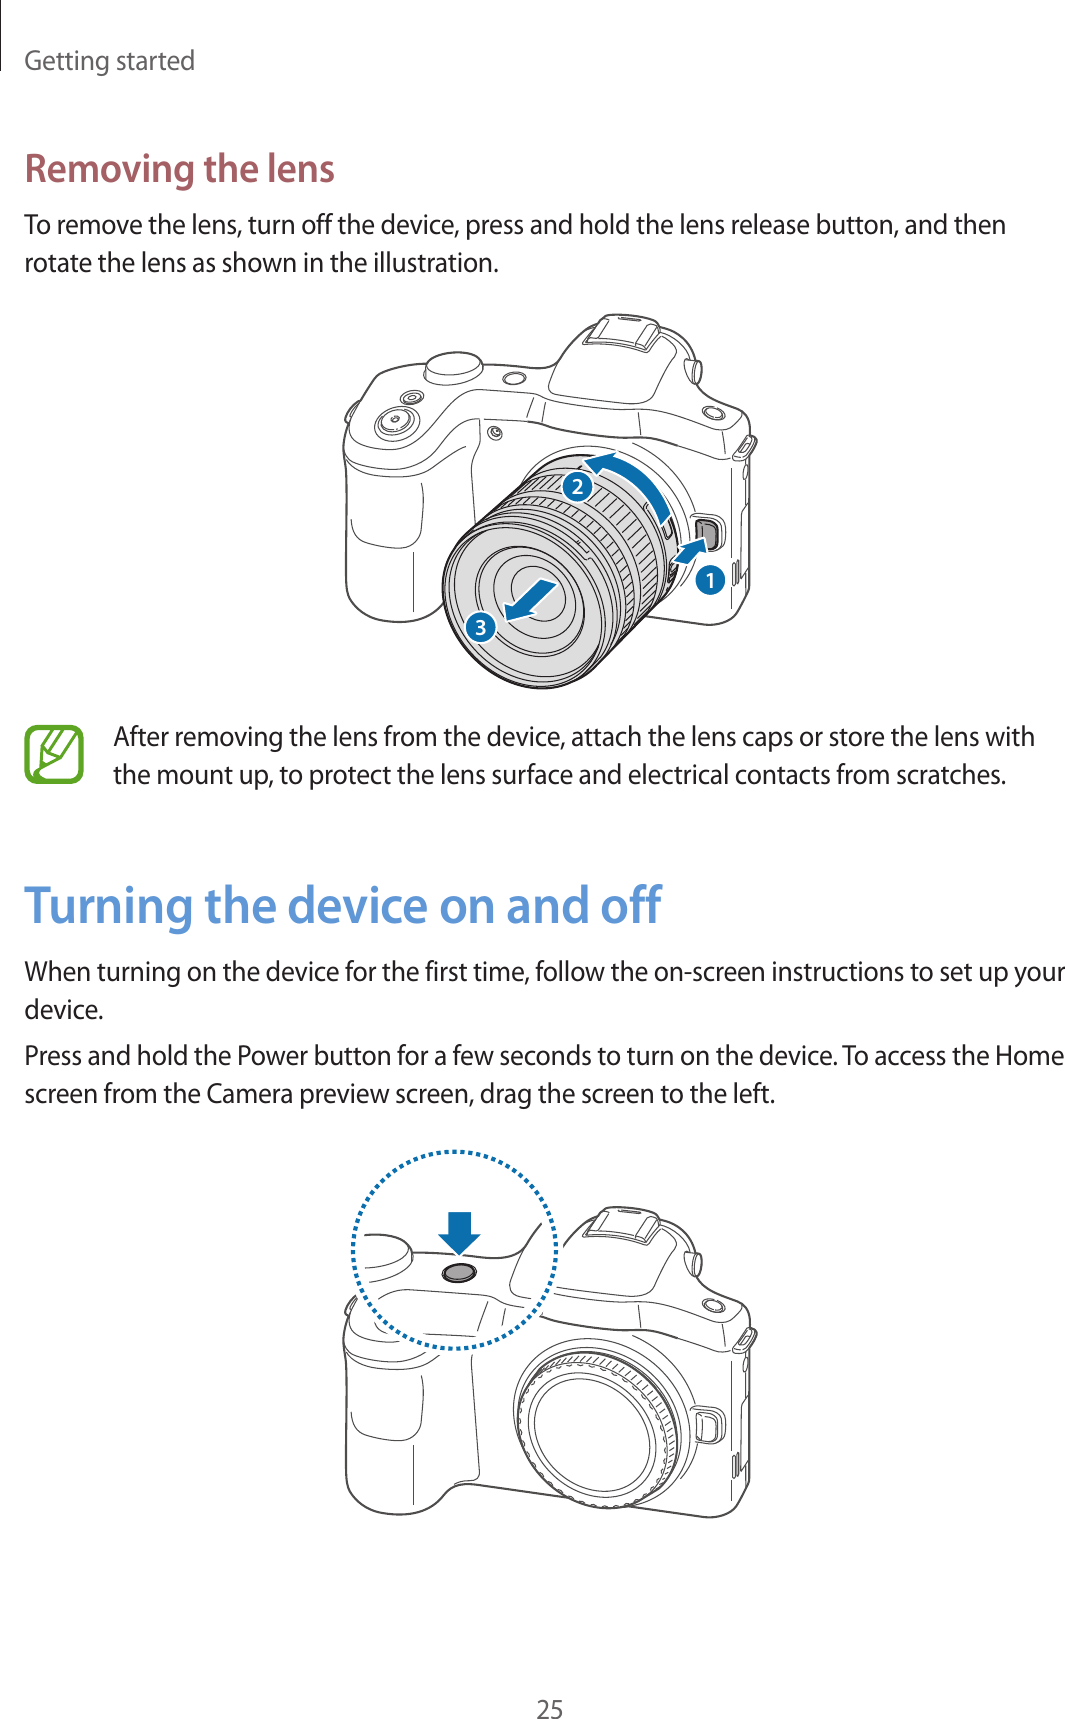 Getting started25Removing the lensTo remove the lens, turn off the device, press and hold the lens release button, and then rotate the lens as shown in the illustration.123After removing the lens from the device, attach the lens caps or store the lens with the mount up, to protect the lens surface and electrical contacts from scratches.Turning the device on and offWhen turning on the device for the first time, follow the on-screen instructions to set up your device.Press and hold the Power button for a few seconds to turn on the device. To access the Home screen from the Camera preview screen, drag the screen to the left.